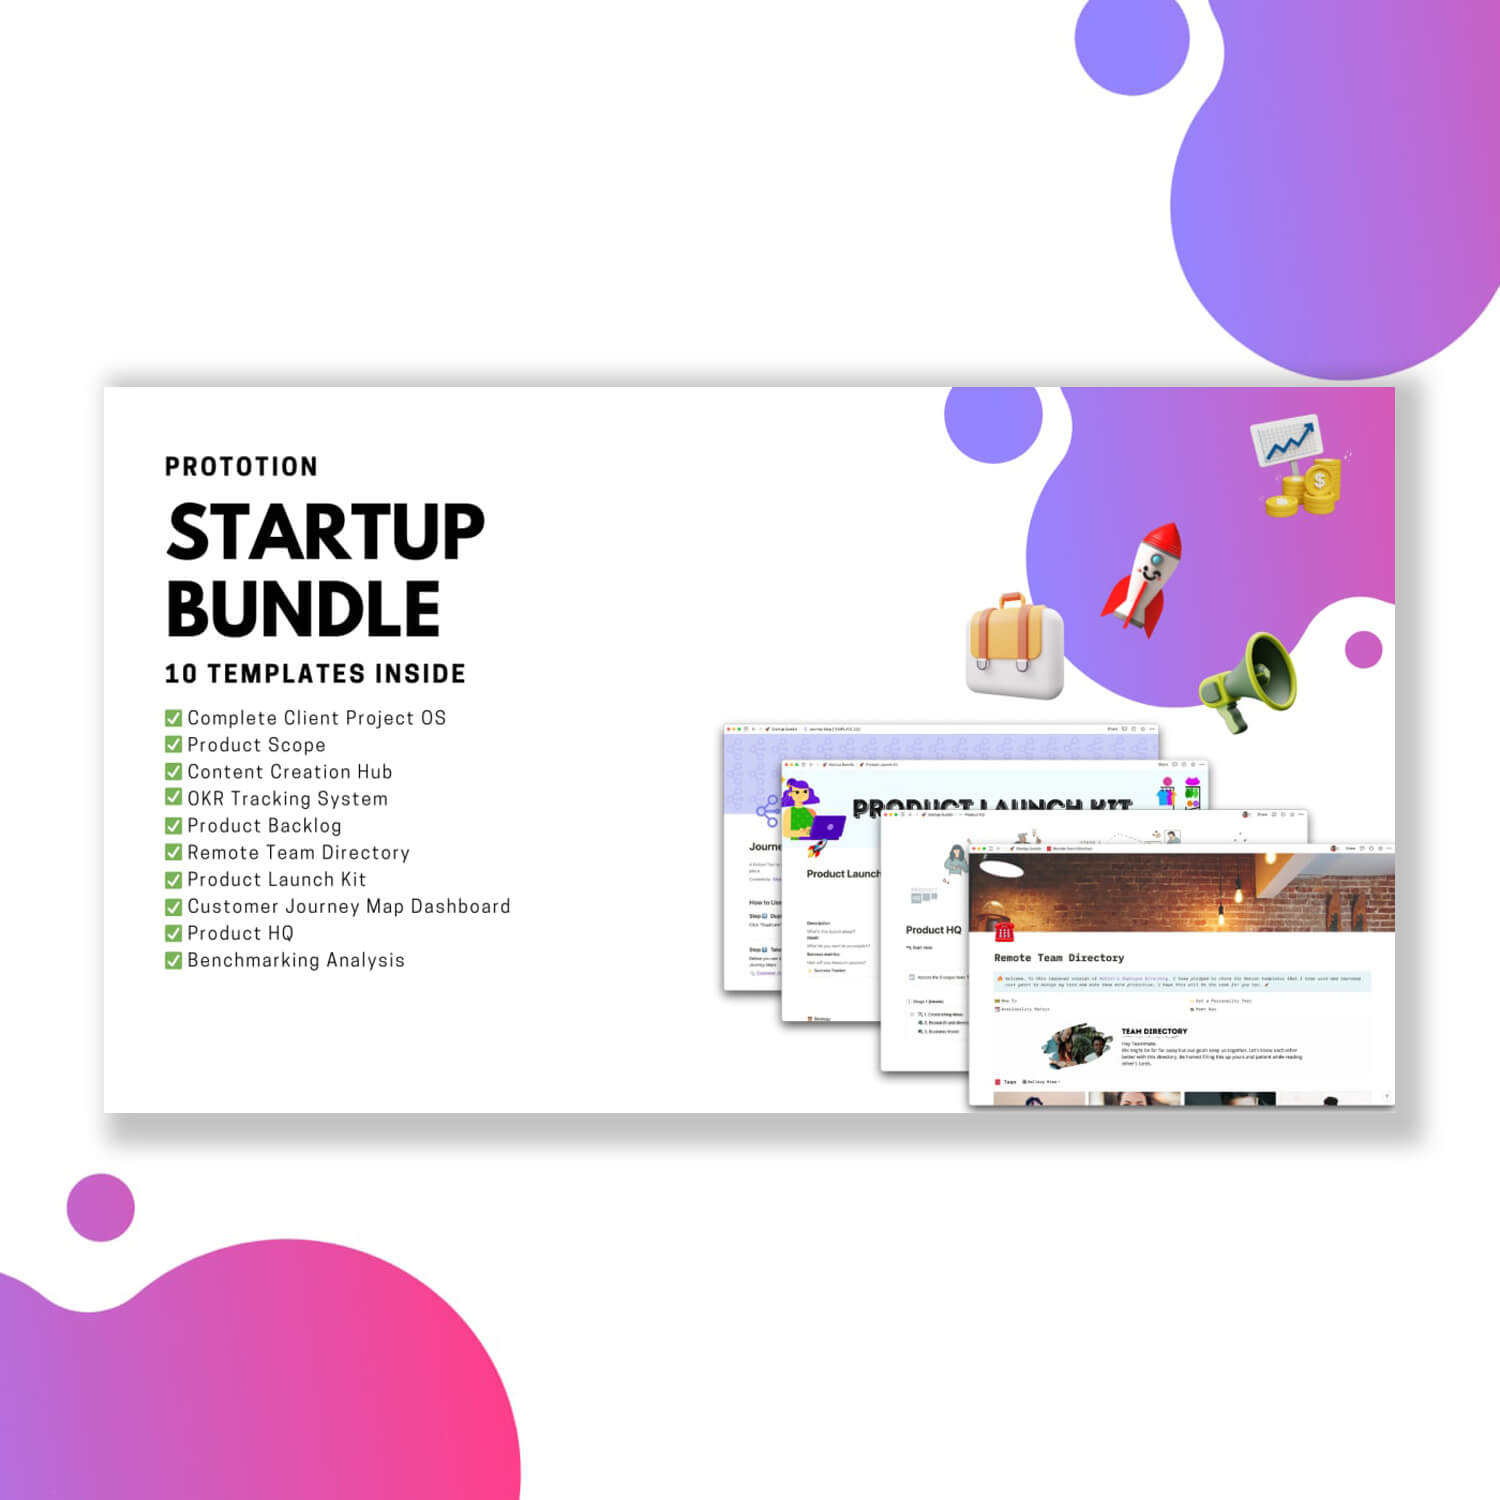 A slide with a bright design containing information about the startup bundle and images of the slides from this presentation.